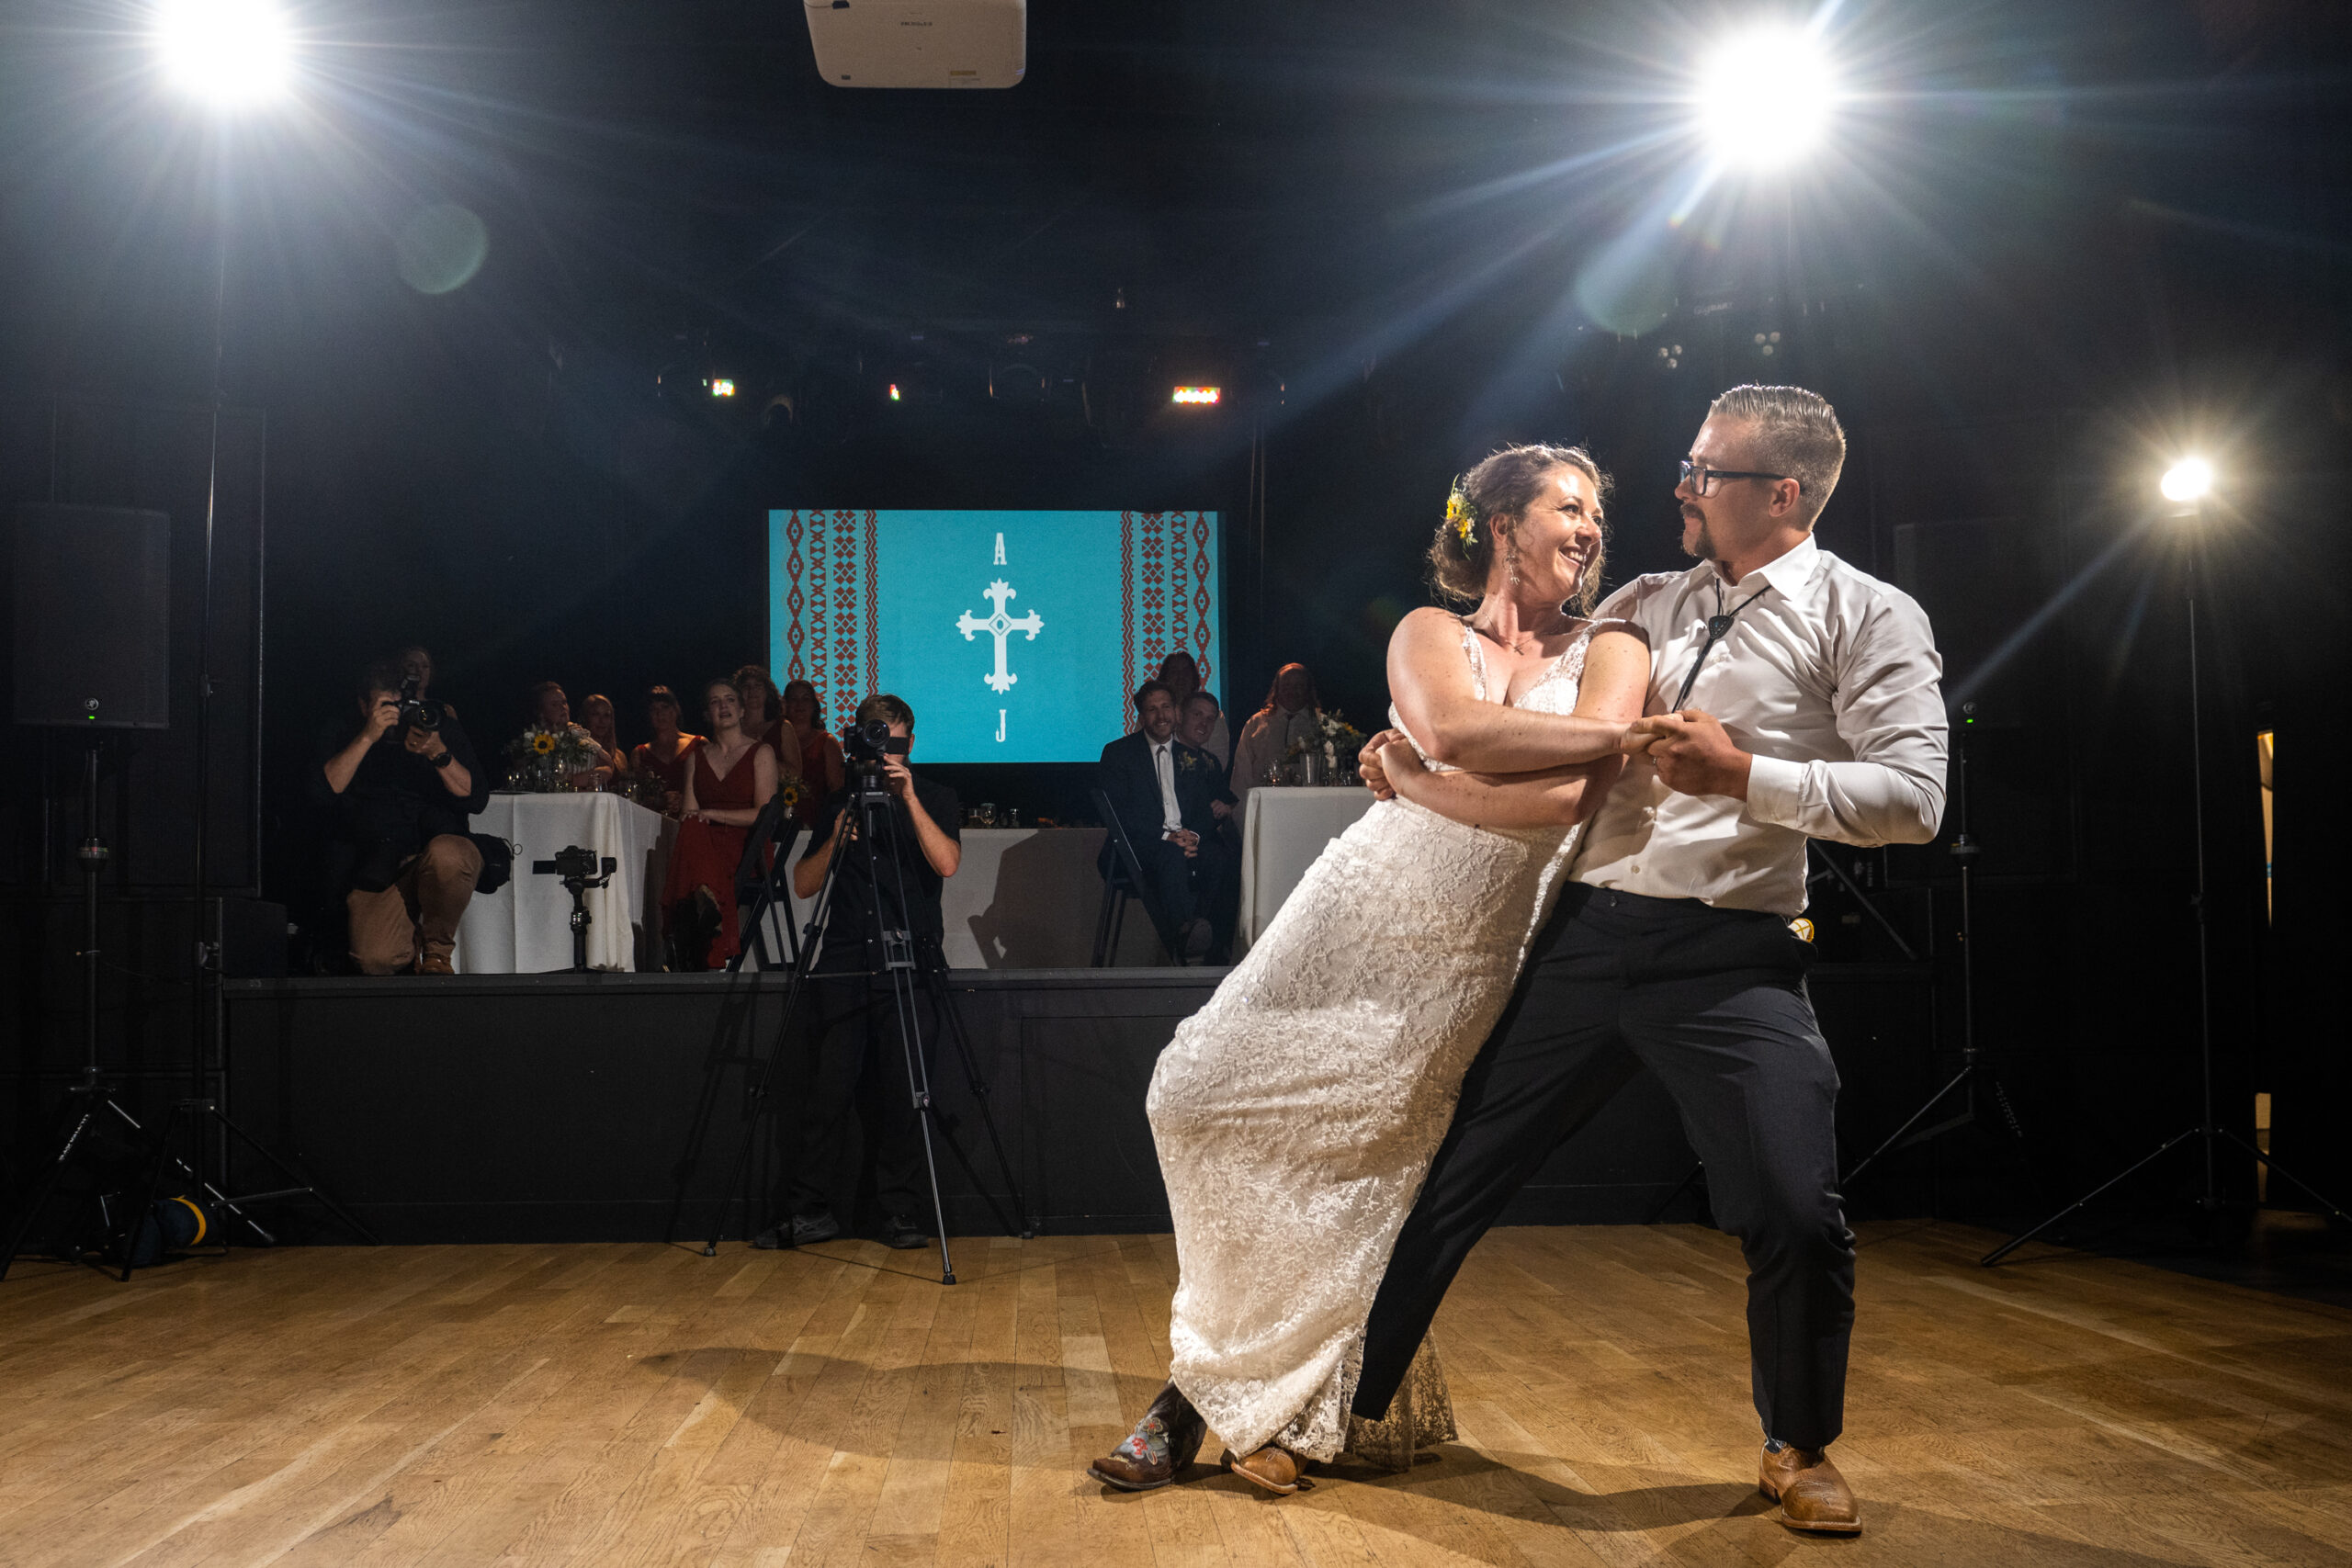 A bride and groom perform their first dance during a wedding reception at the Rose Event Center in Golden, Colorado.